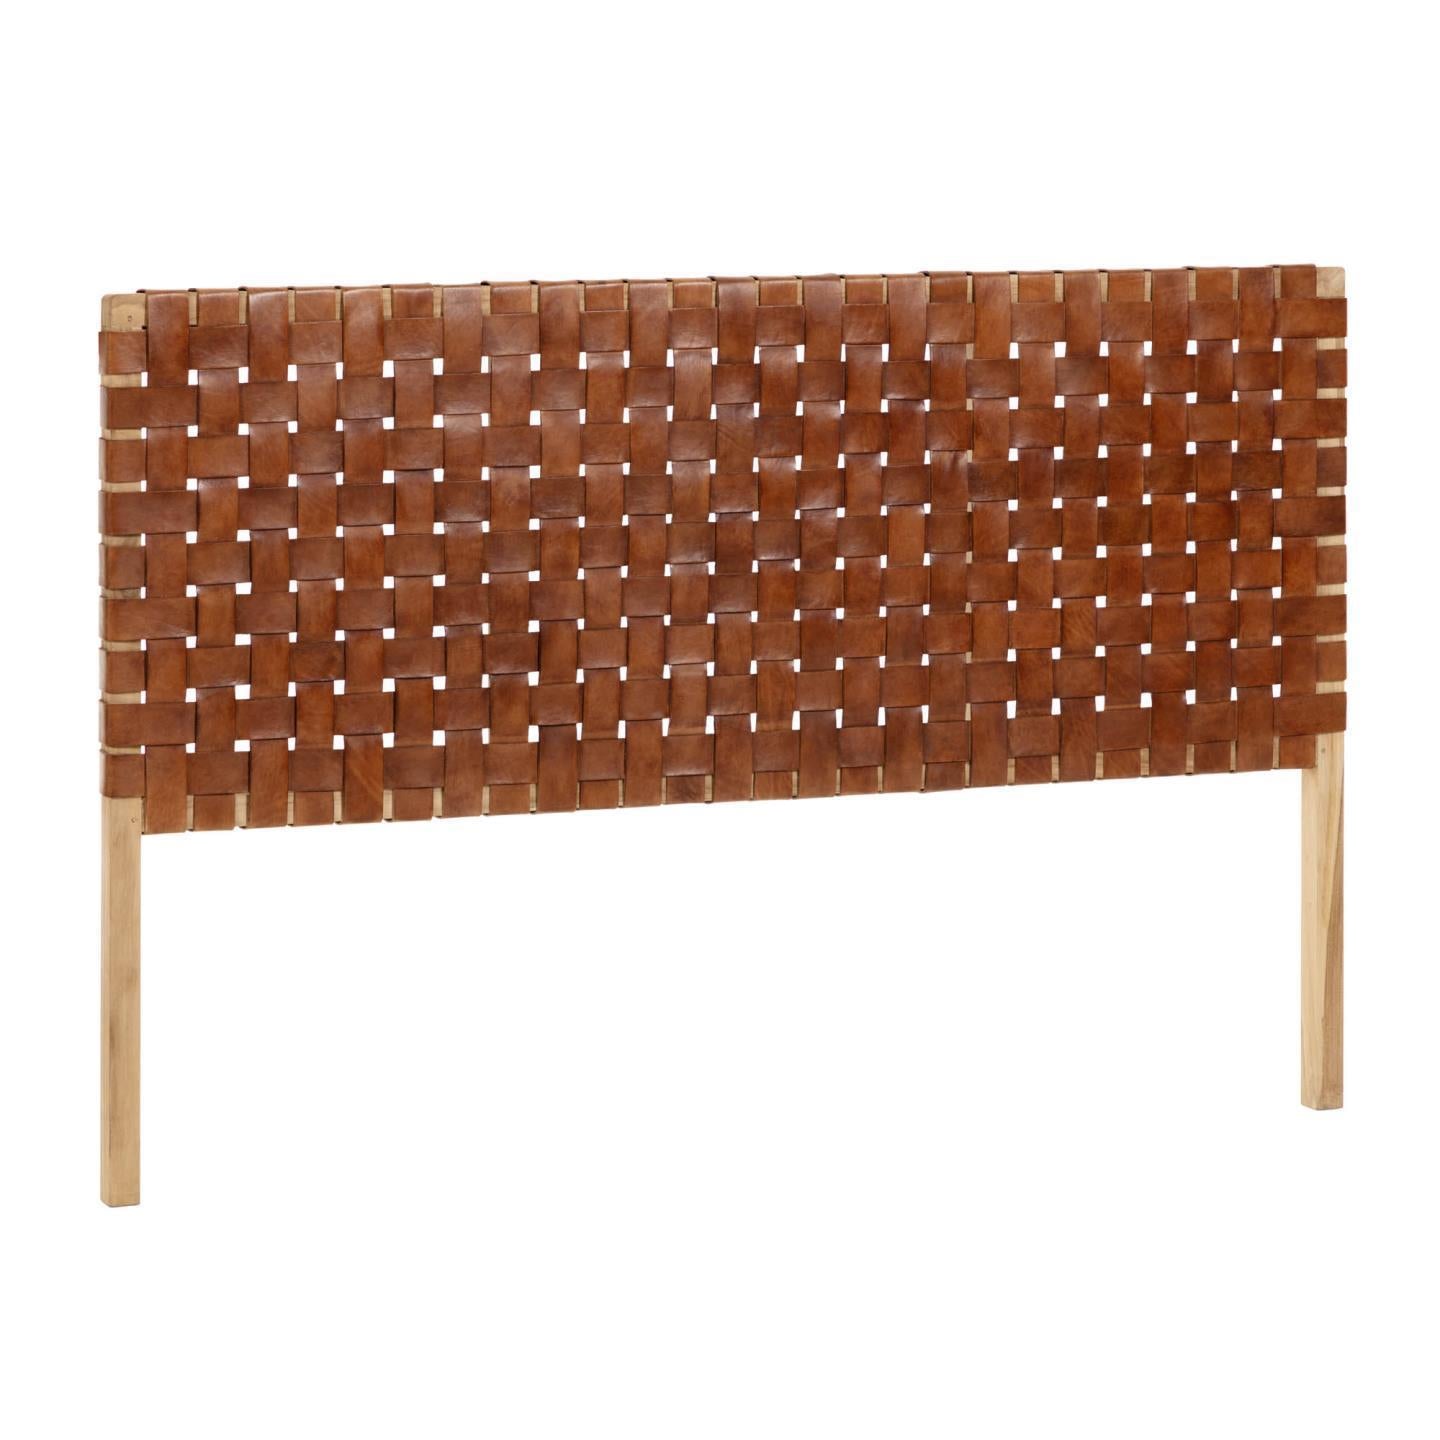 Calixta solid teak wood and leather headboard, for 150 cm beds